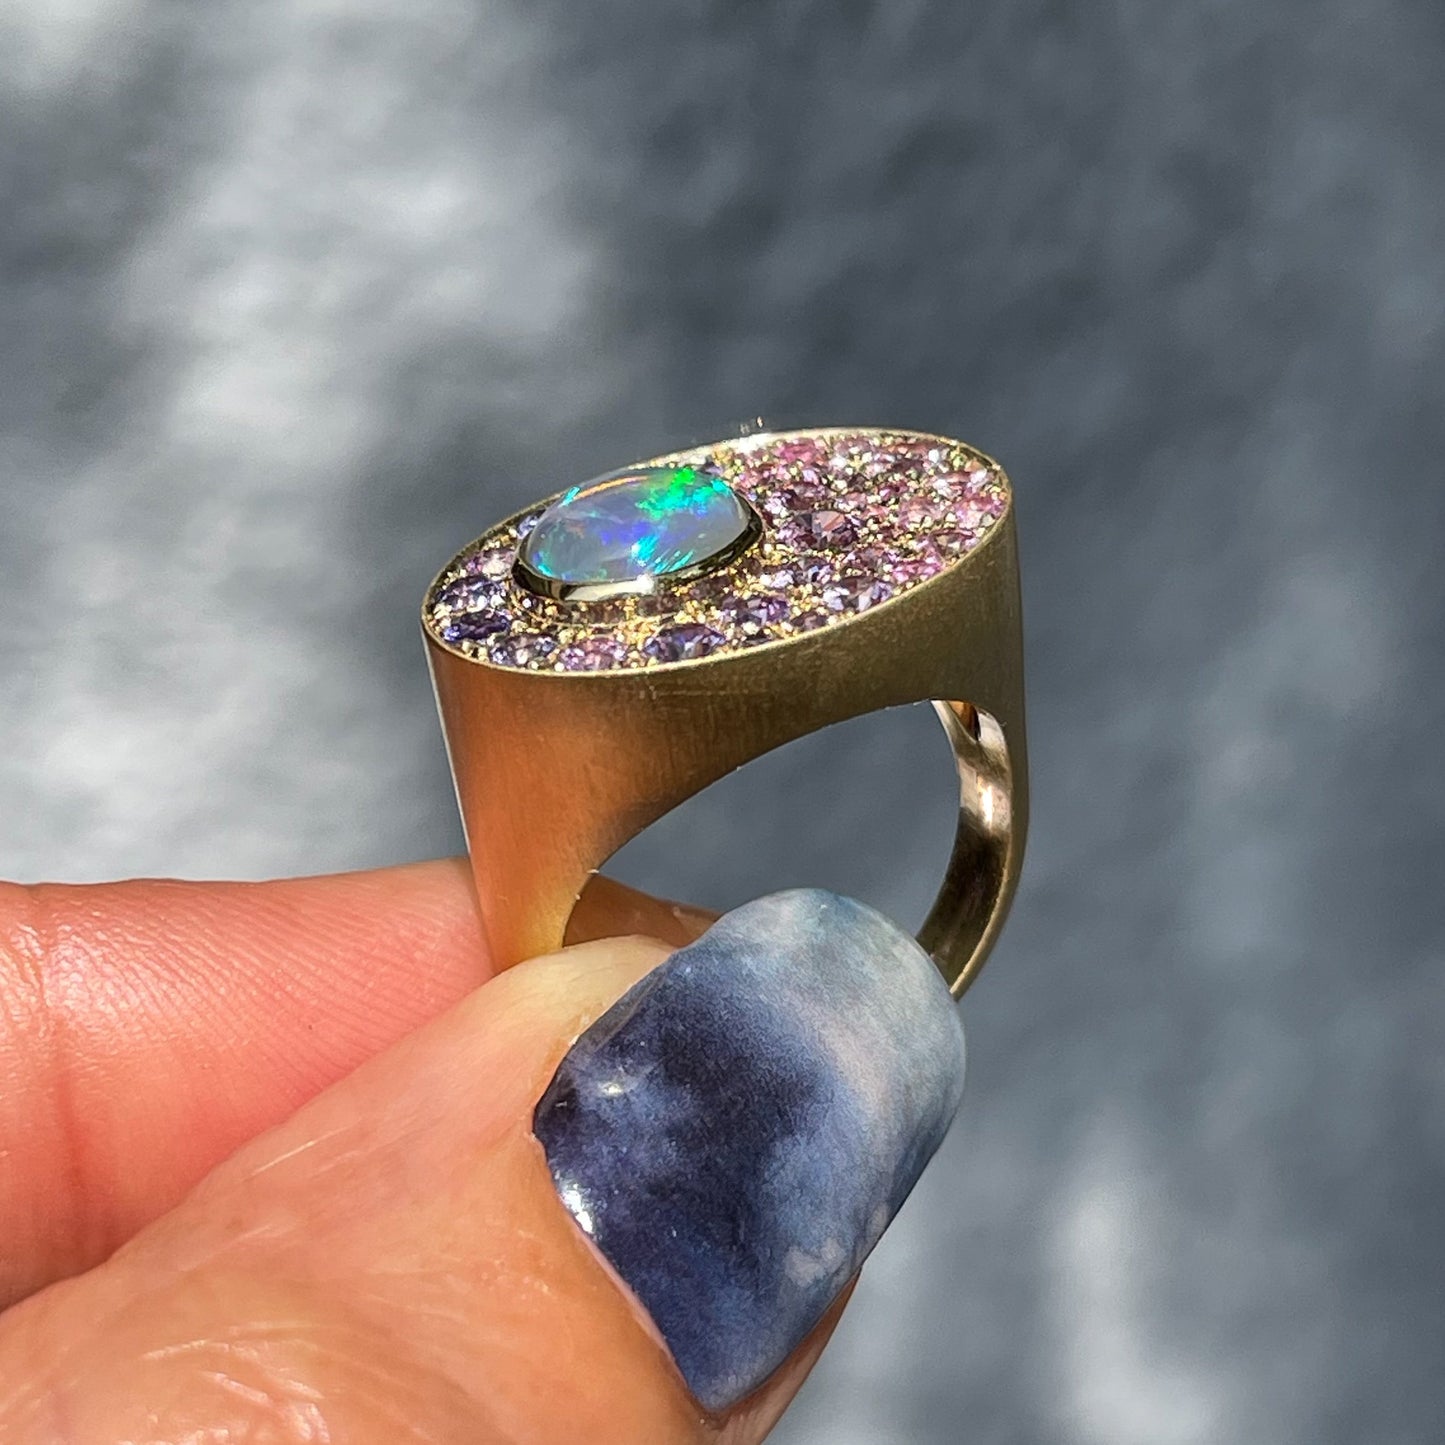 An Australian Opal Ring by NIXIN Jewelry held up to show its profile. The opal signet ring  is made in 14k gold with ombré sapphires.